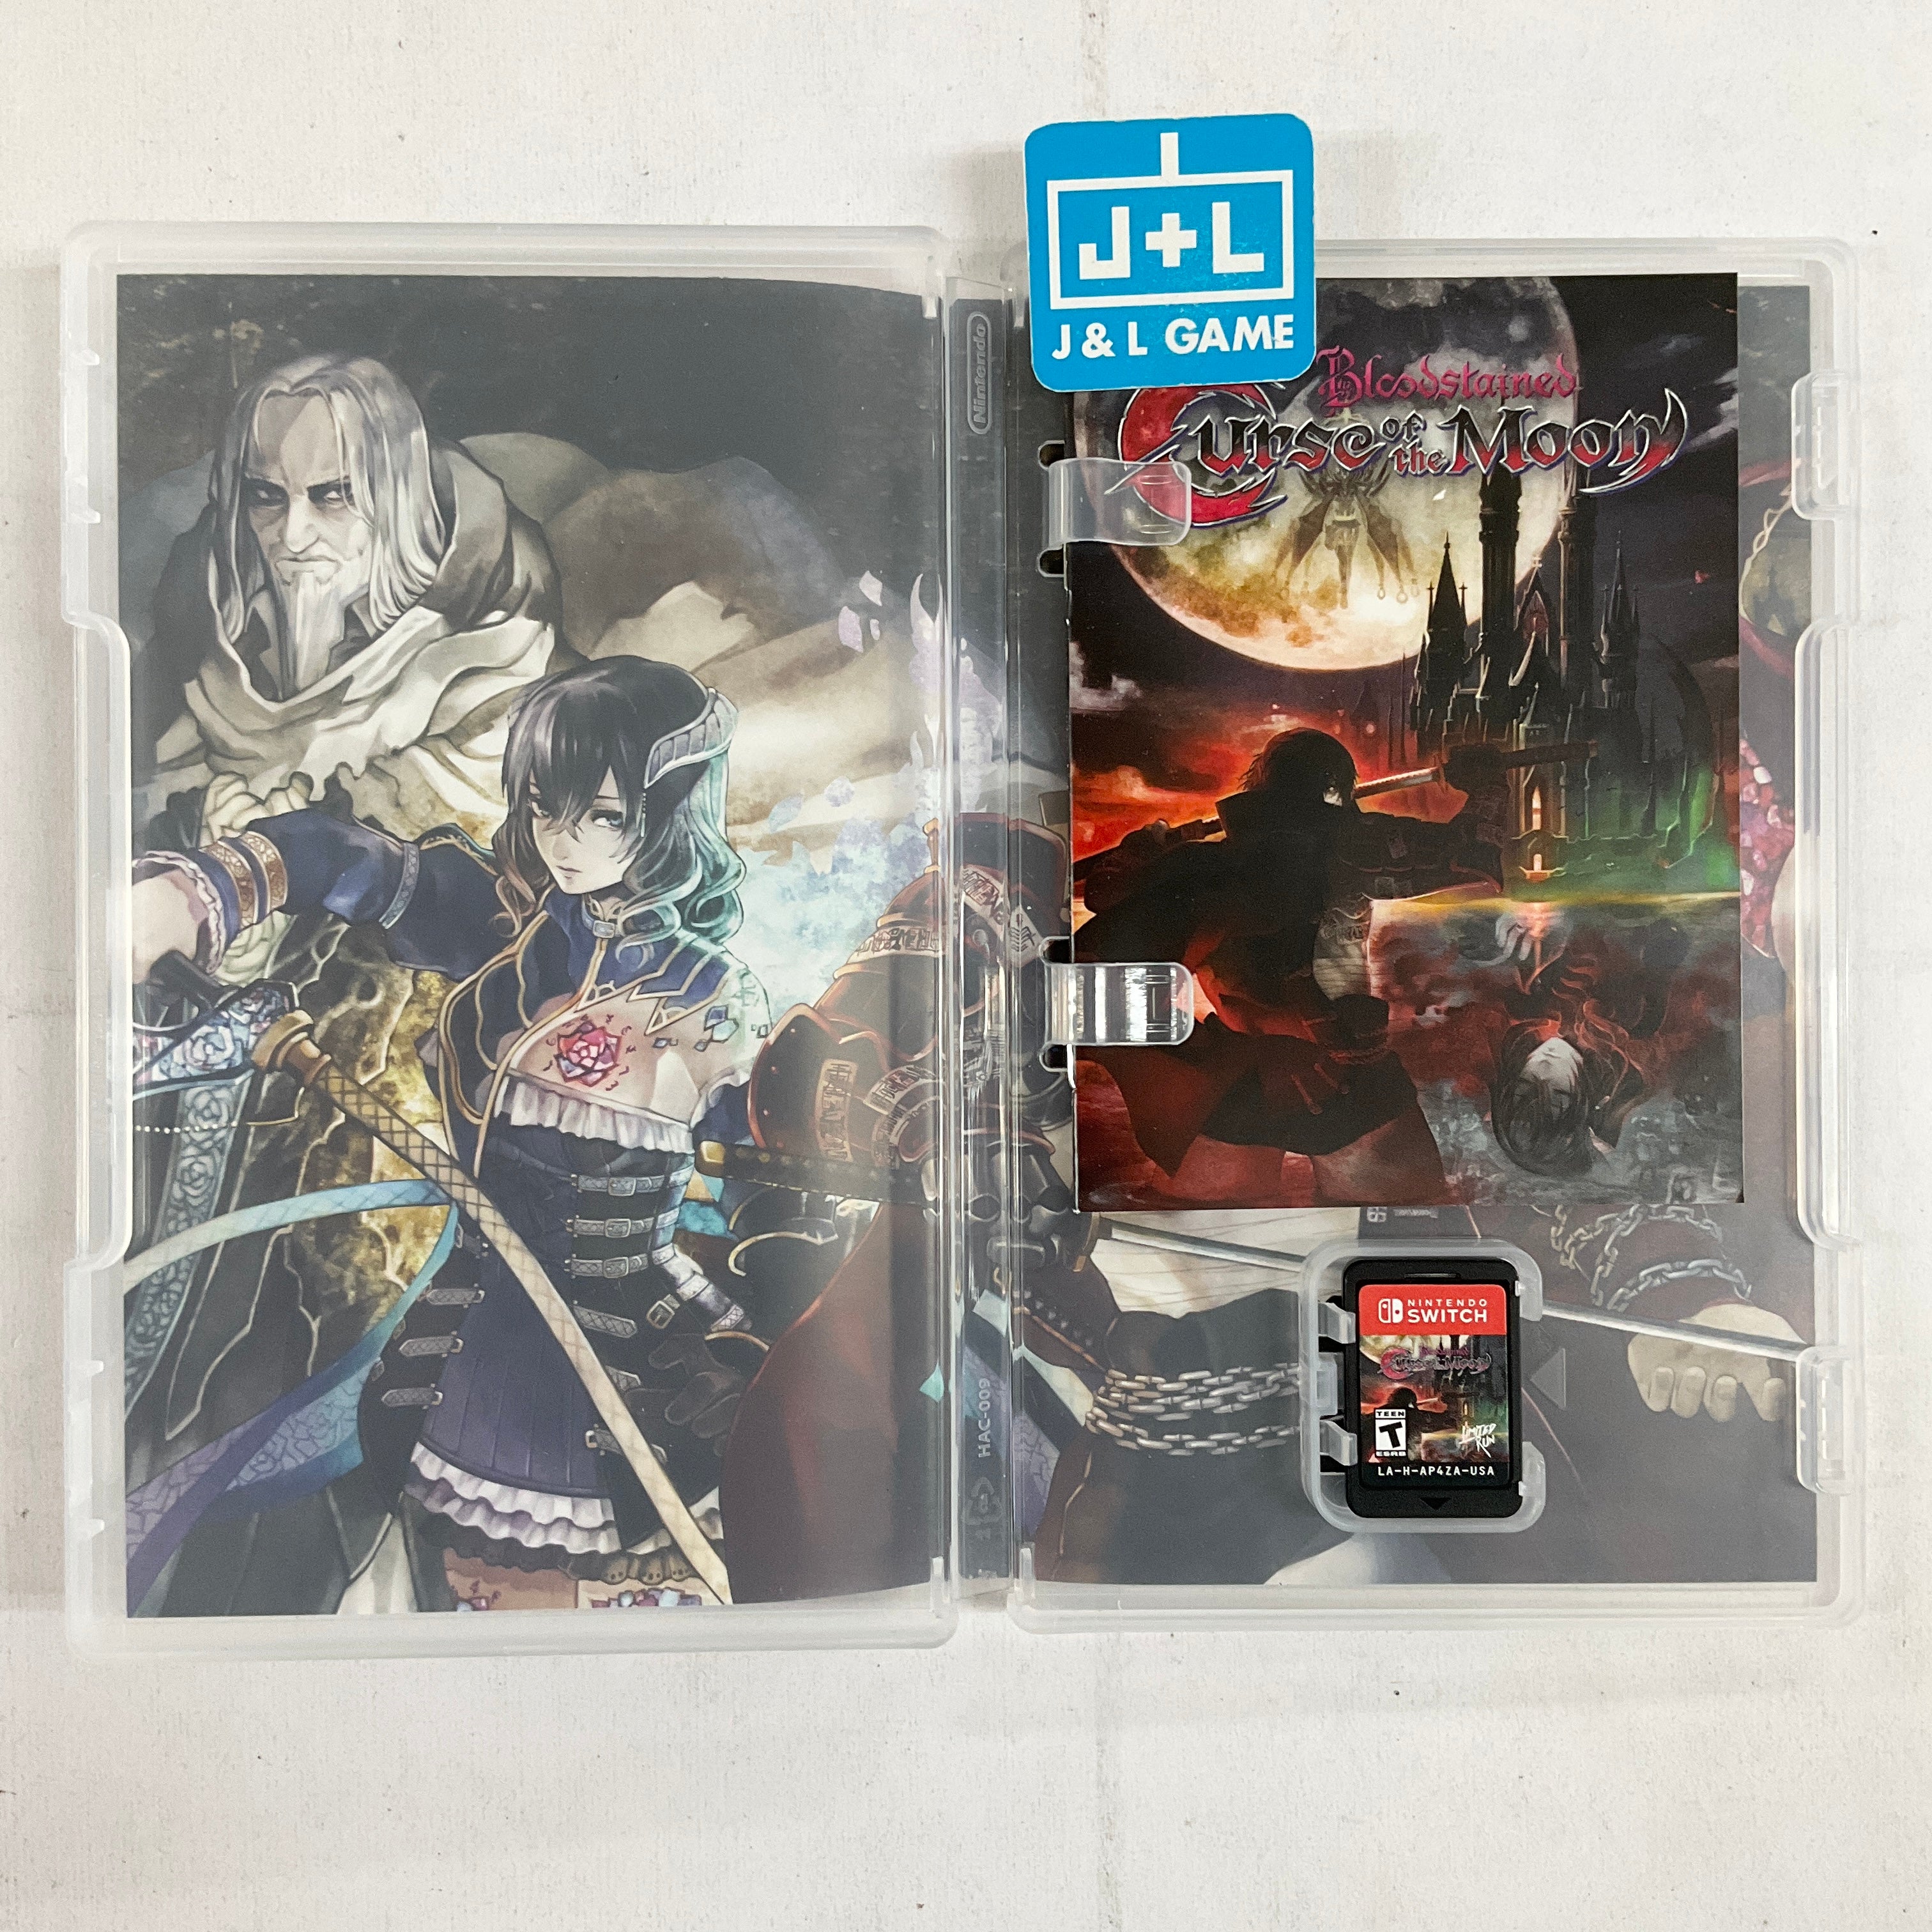 Bloodstained: Curse of the Moon (Limited Run #031) (Alt. Cover) - (NSW) Nintendo Switch [Pre-Owned] Video Games Limited Run Games   